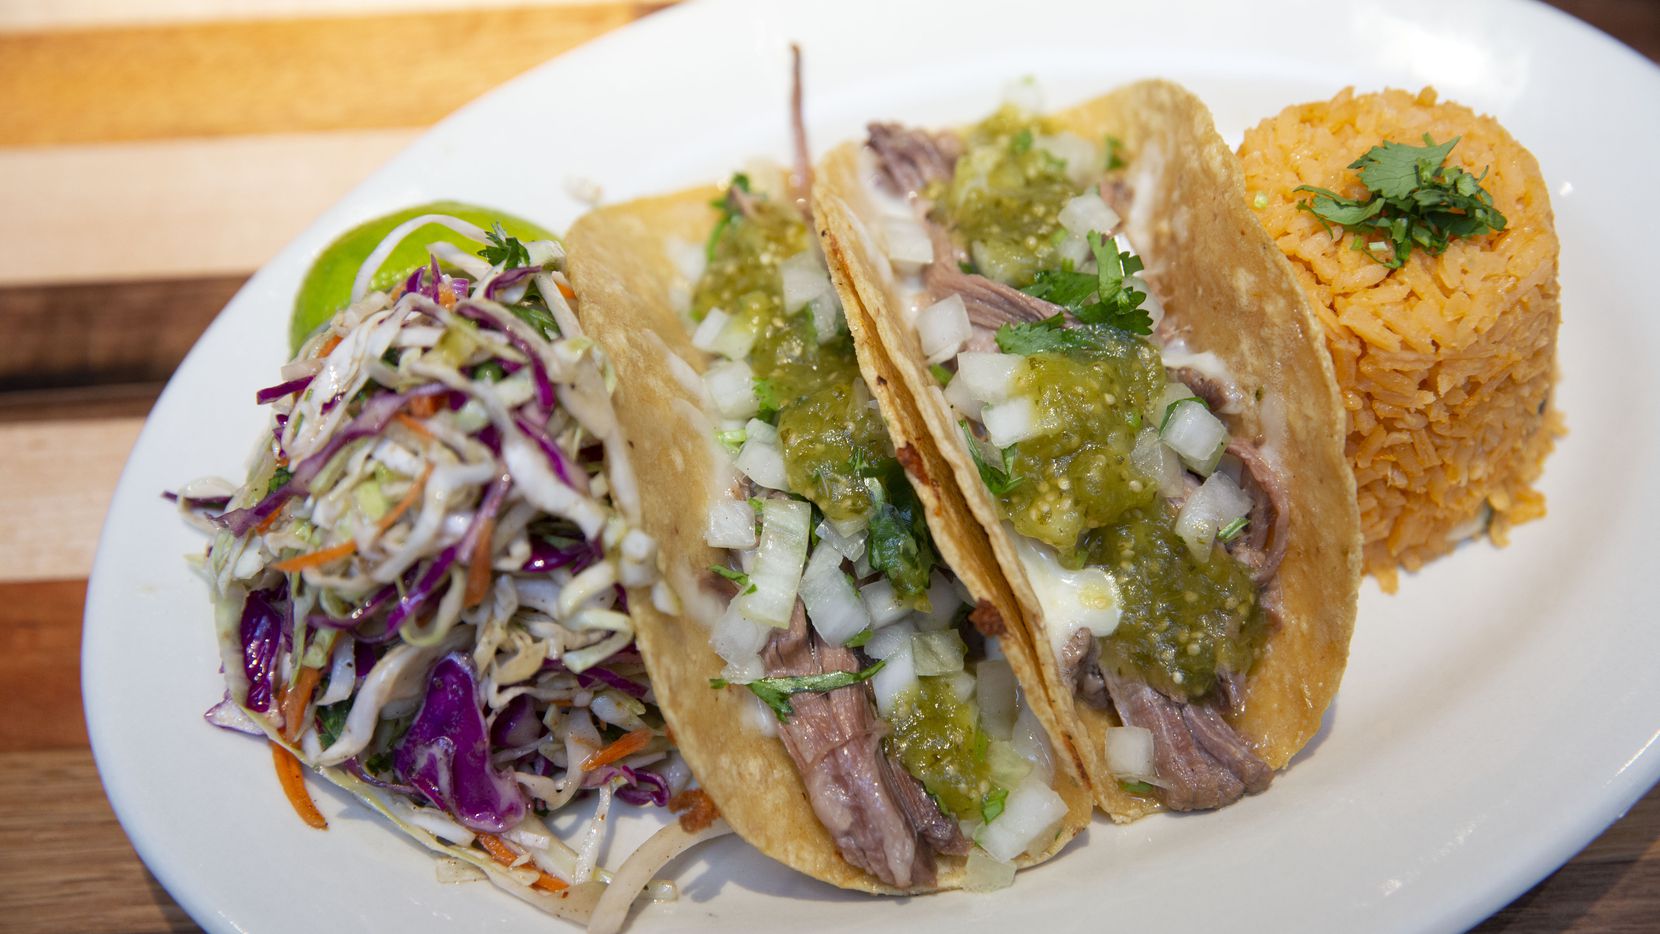 Brisket tacos are one of Mesero's most popular items. The new location in the Preston Hollow...